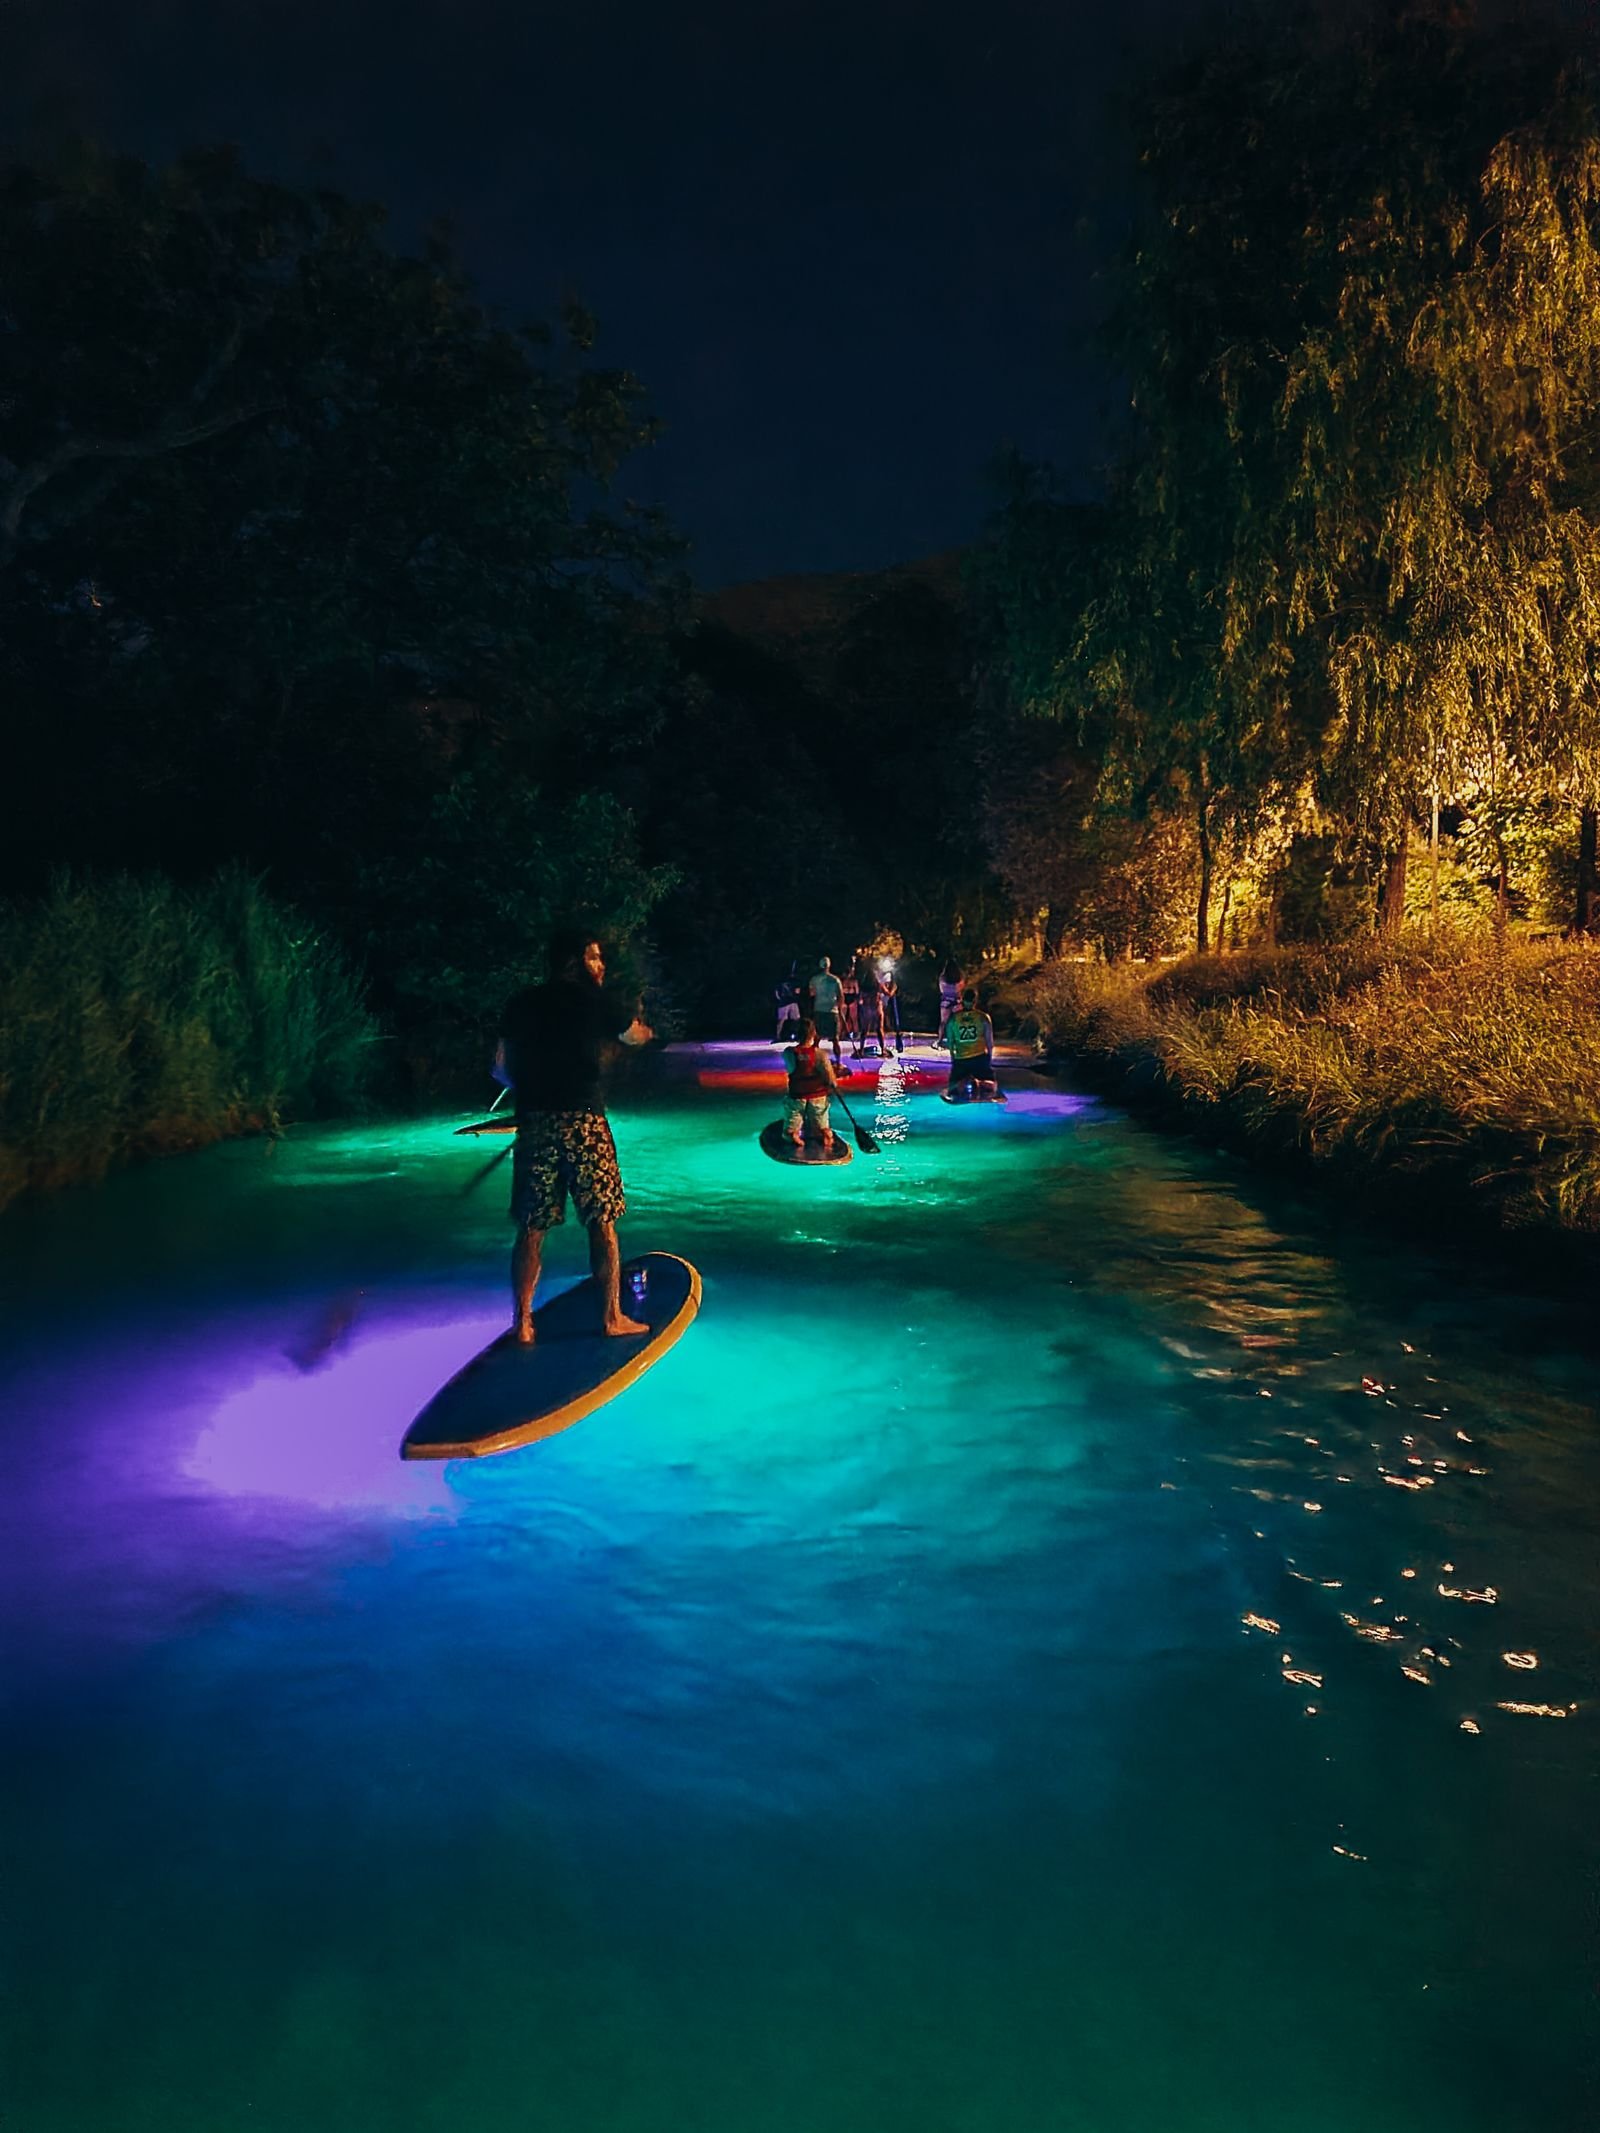 Many people standing on paddleboard lit up in neon colours going down a river at night